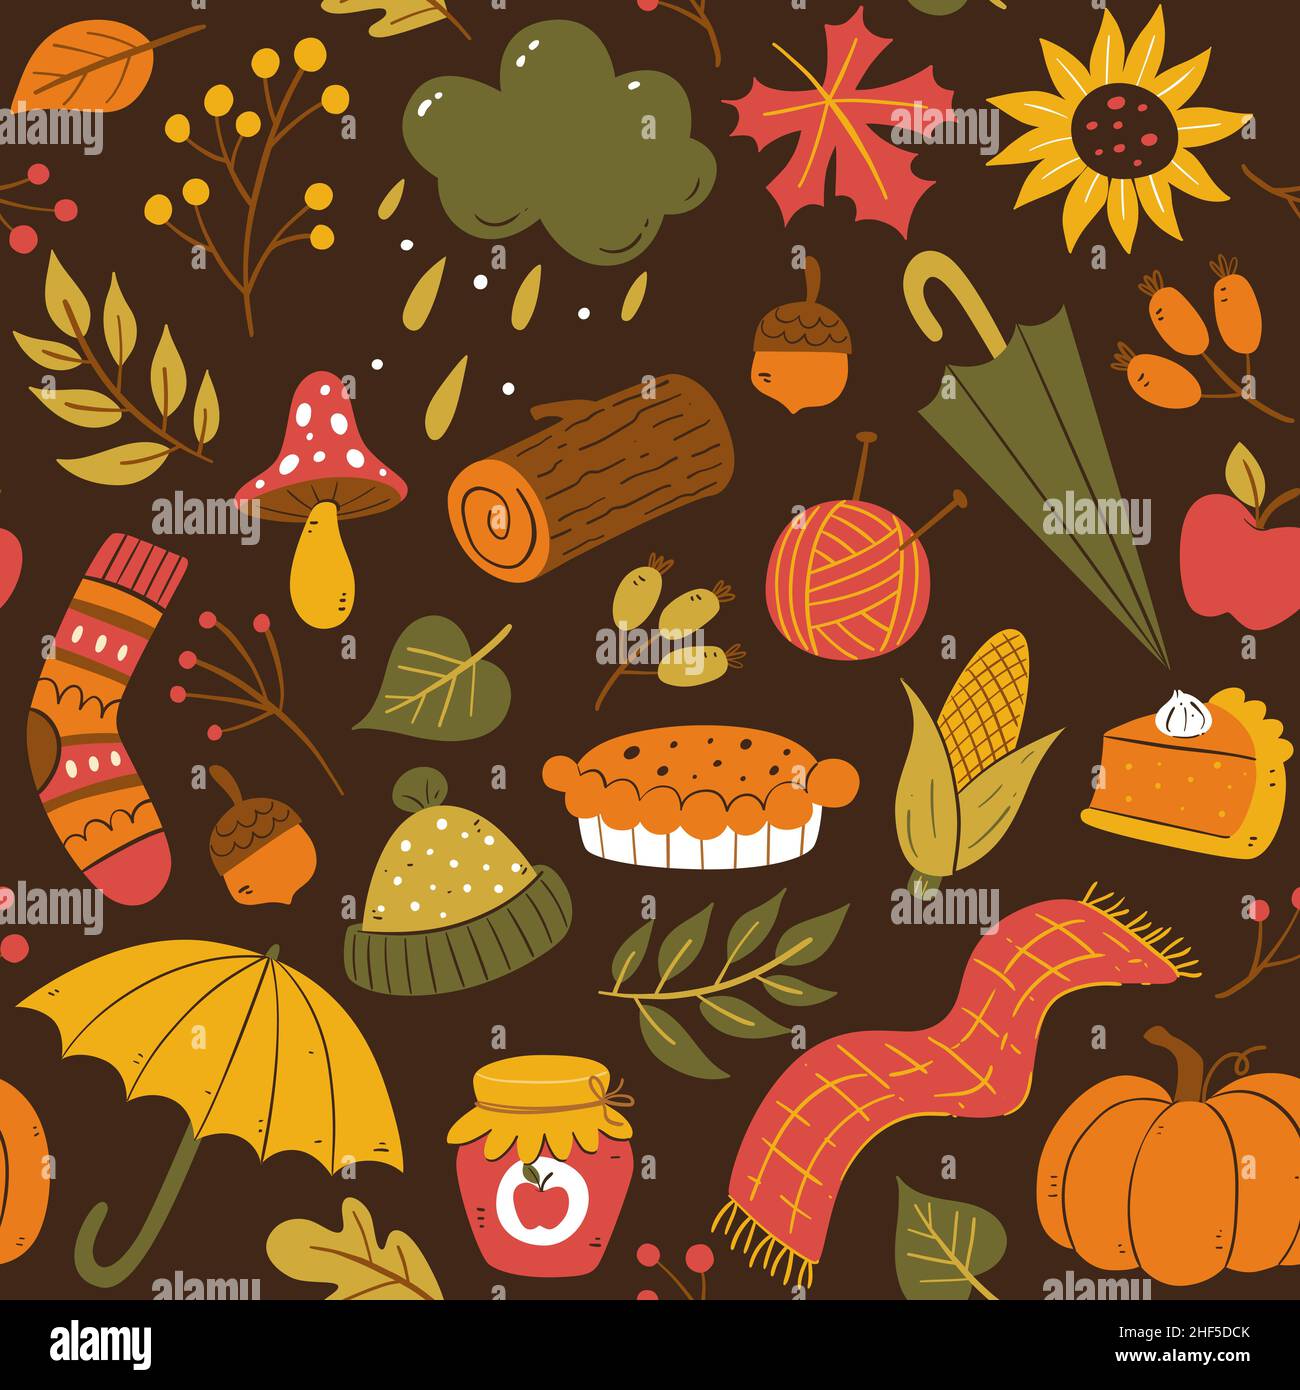 Colorful Autumn seamless pattern. Hand drawn seasonal elements isolated on dark background. Vector illustration. Stock Vector